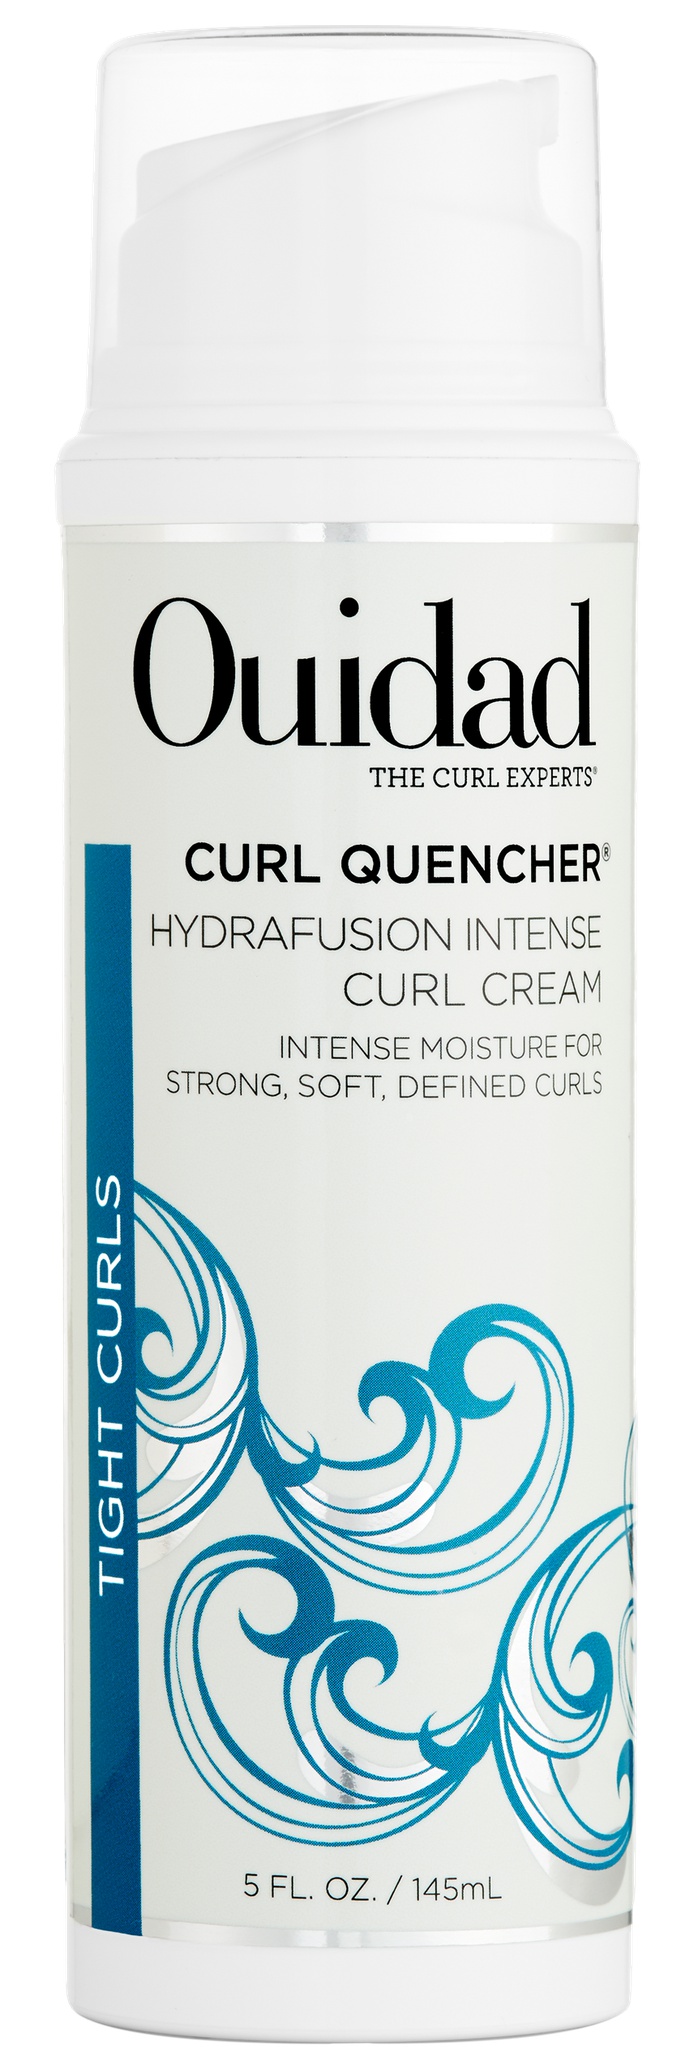 Ouidad Curl Quencher Hydrafusion Intense Curl Crème